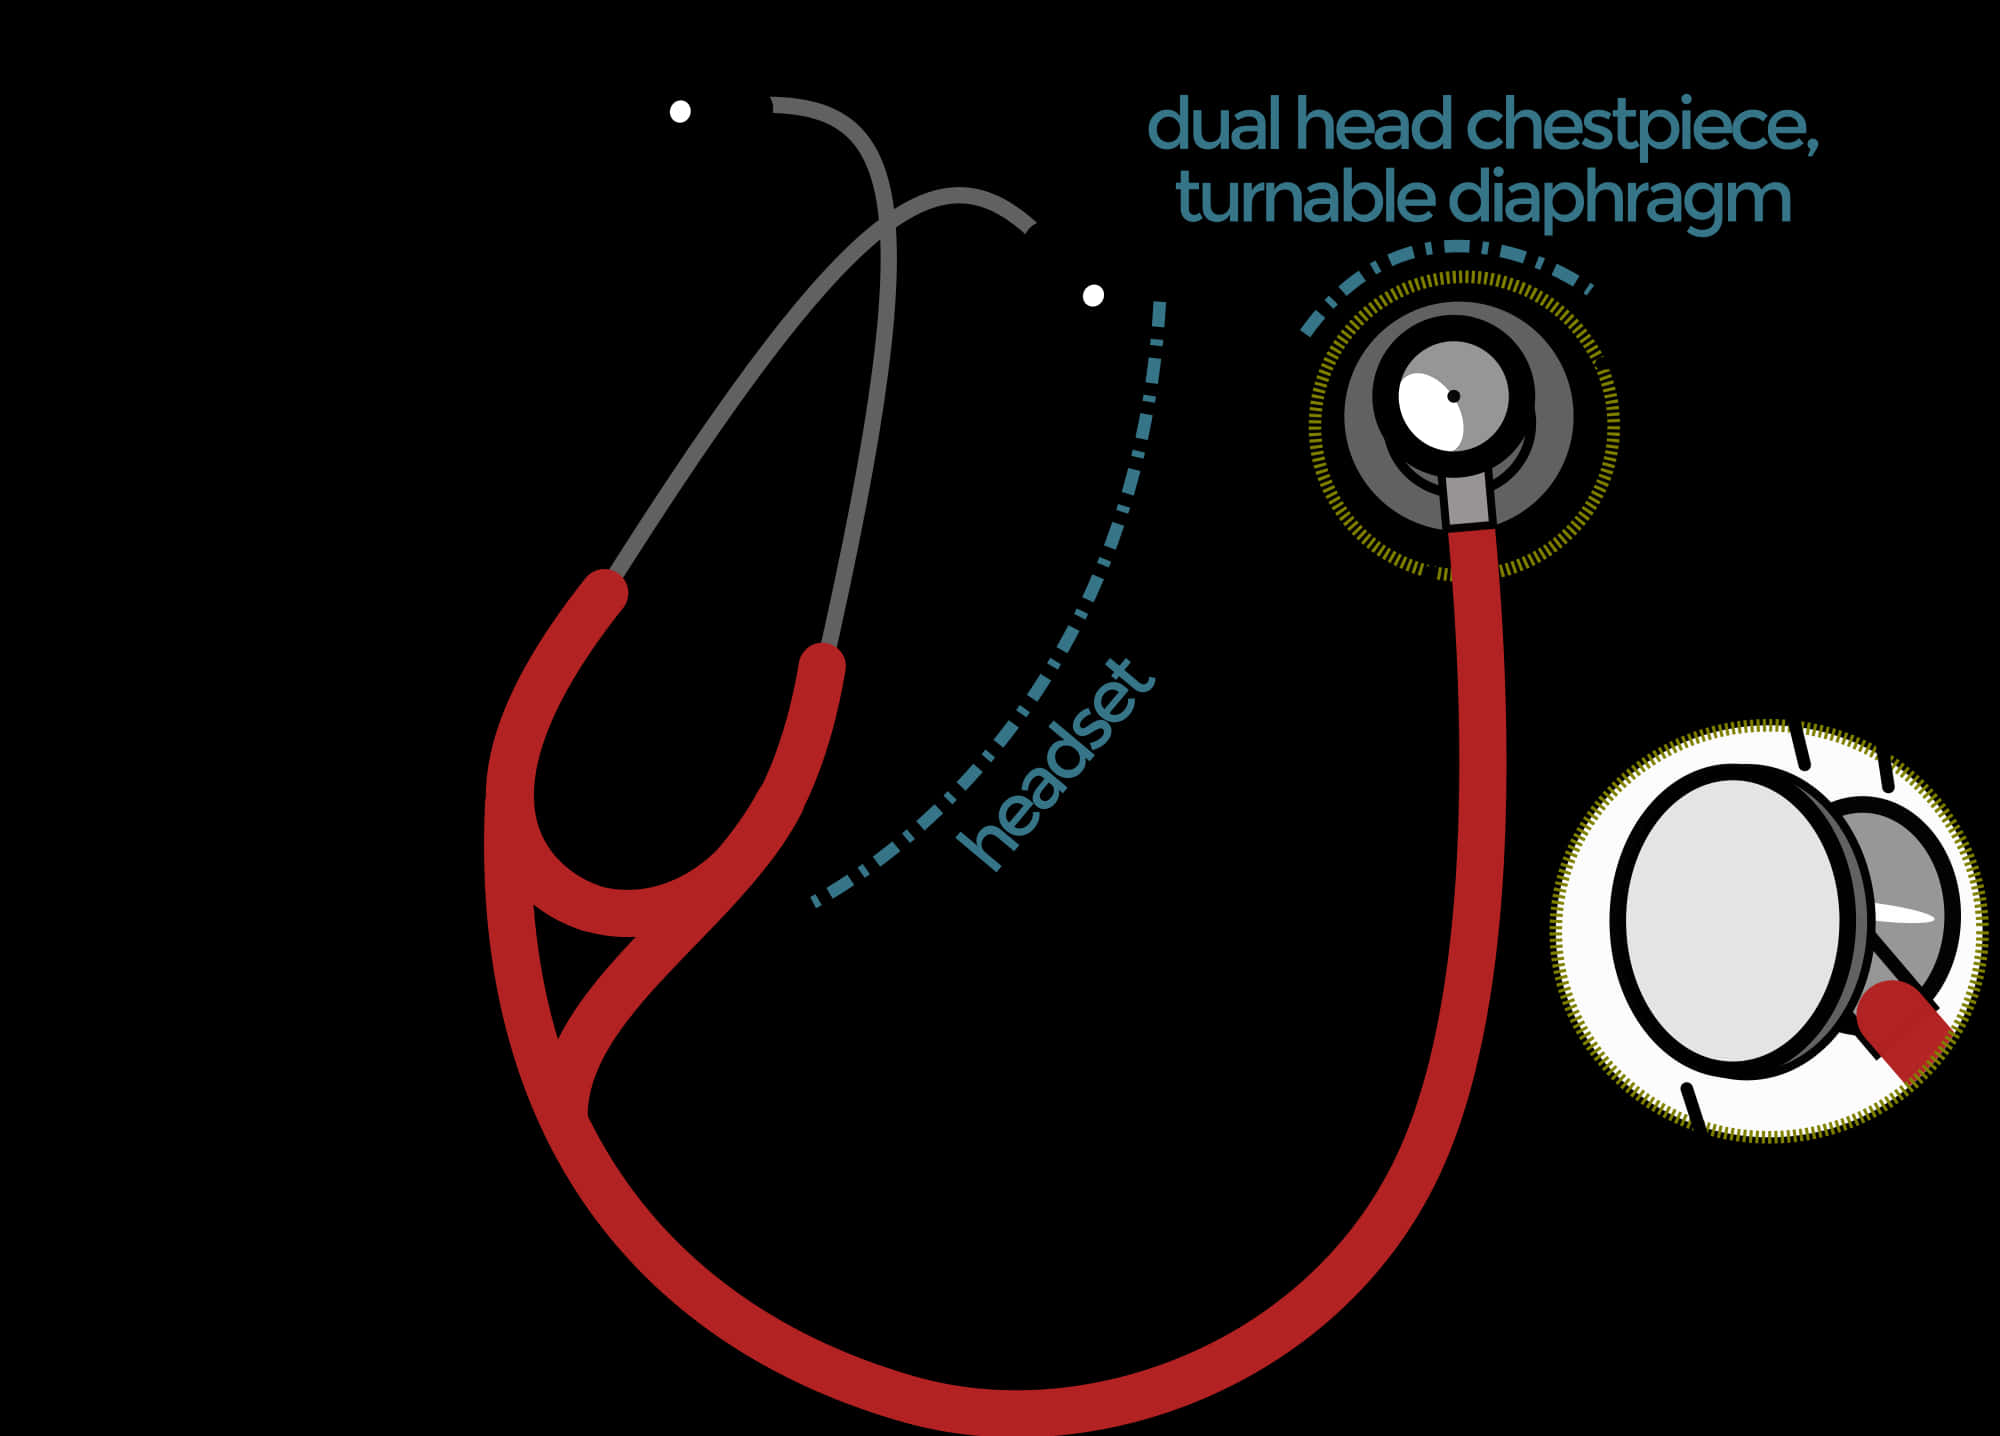 Download Stethoscope Components Illustration | Wallpapers.com